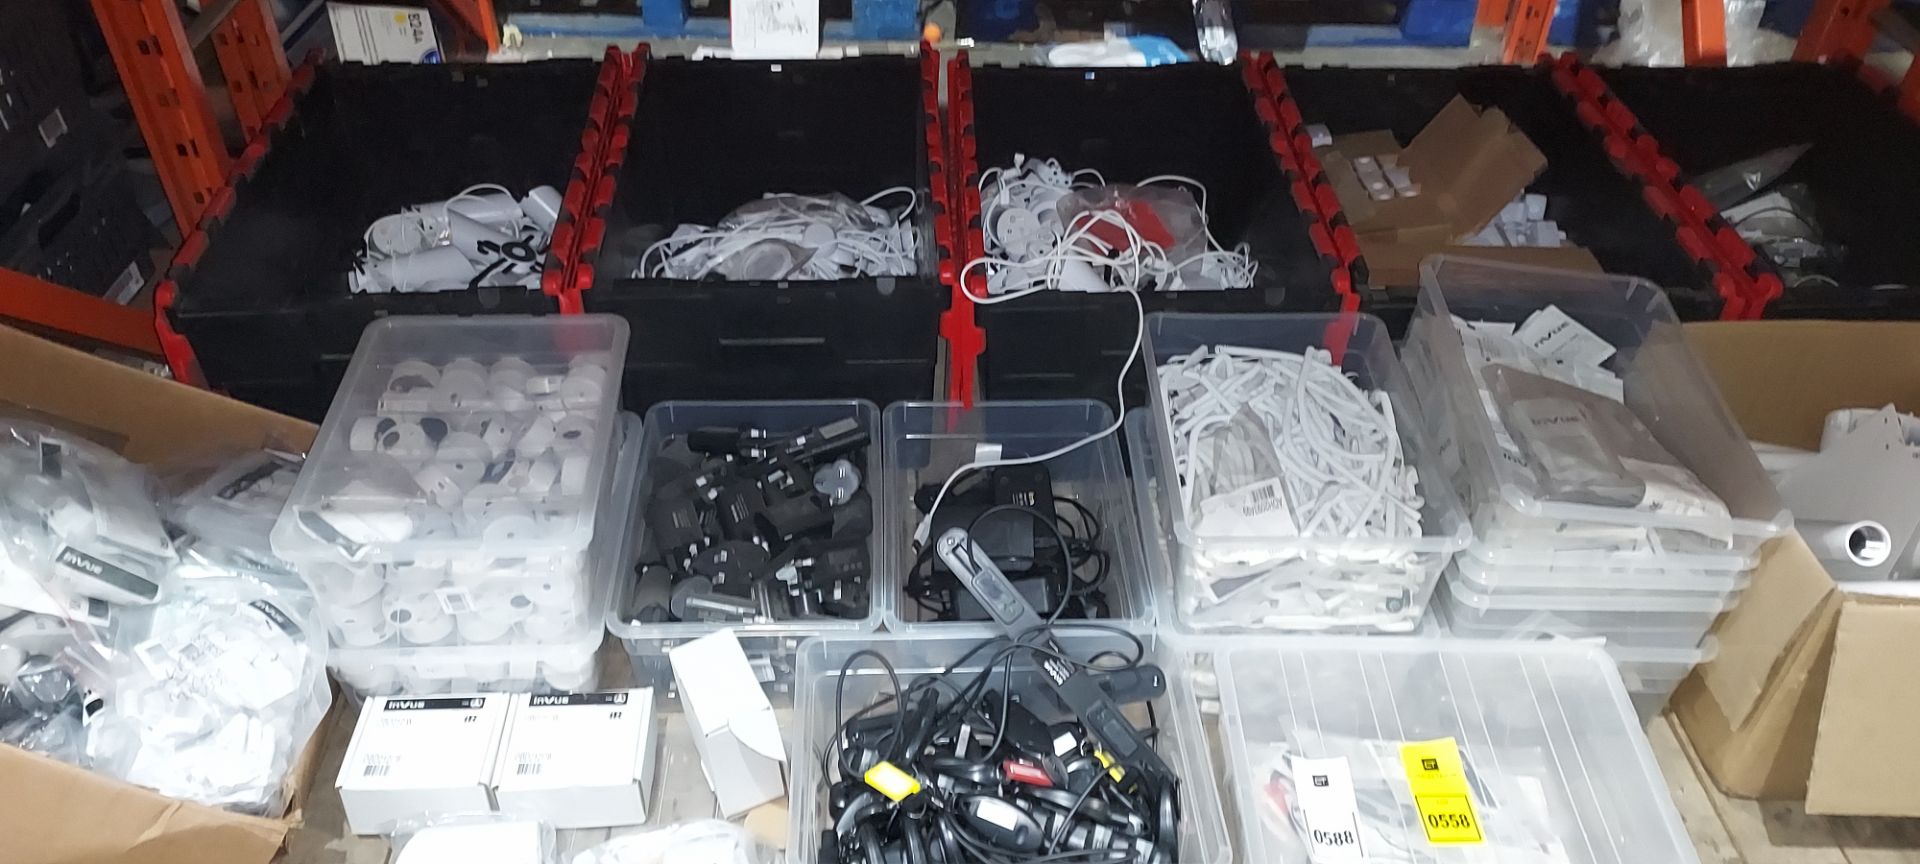 FULL BAY MIXED LOT CONTAINING - INVUE APPLE WATCH SECURITY TAGS - PHONE SECURITY TAGS - 1000+